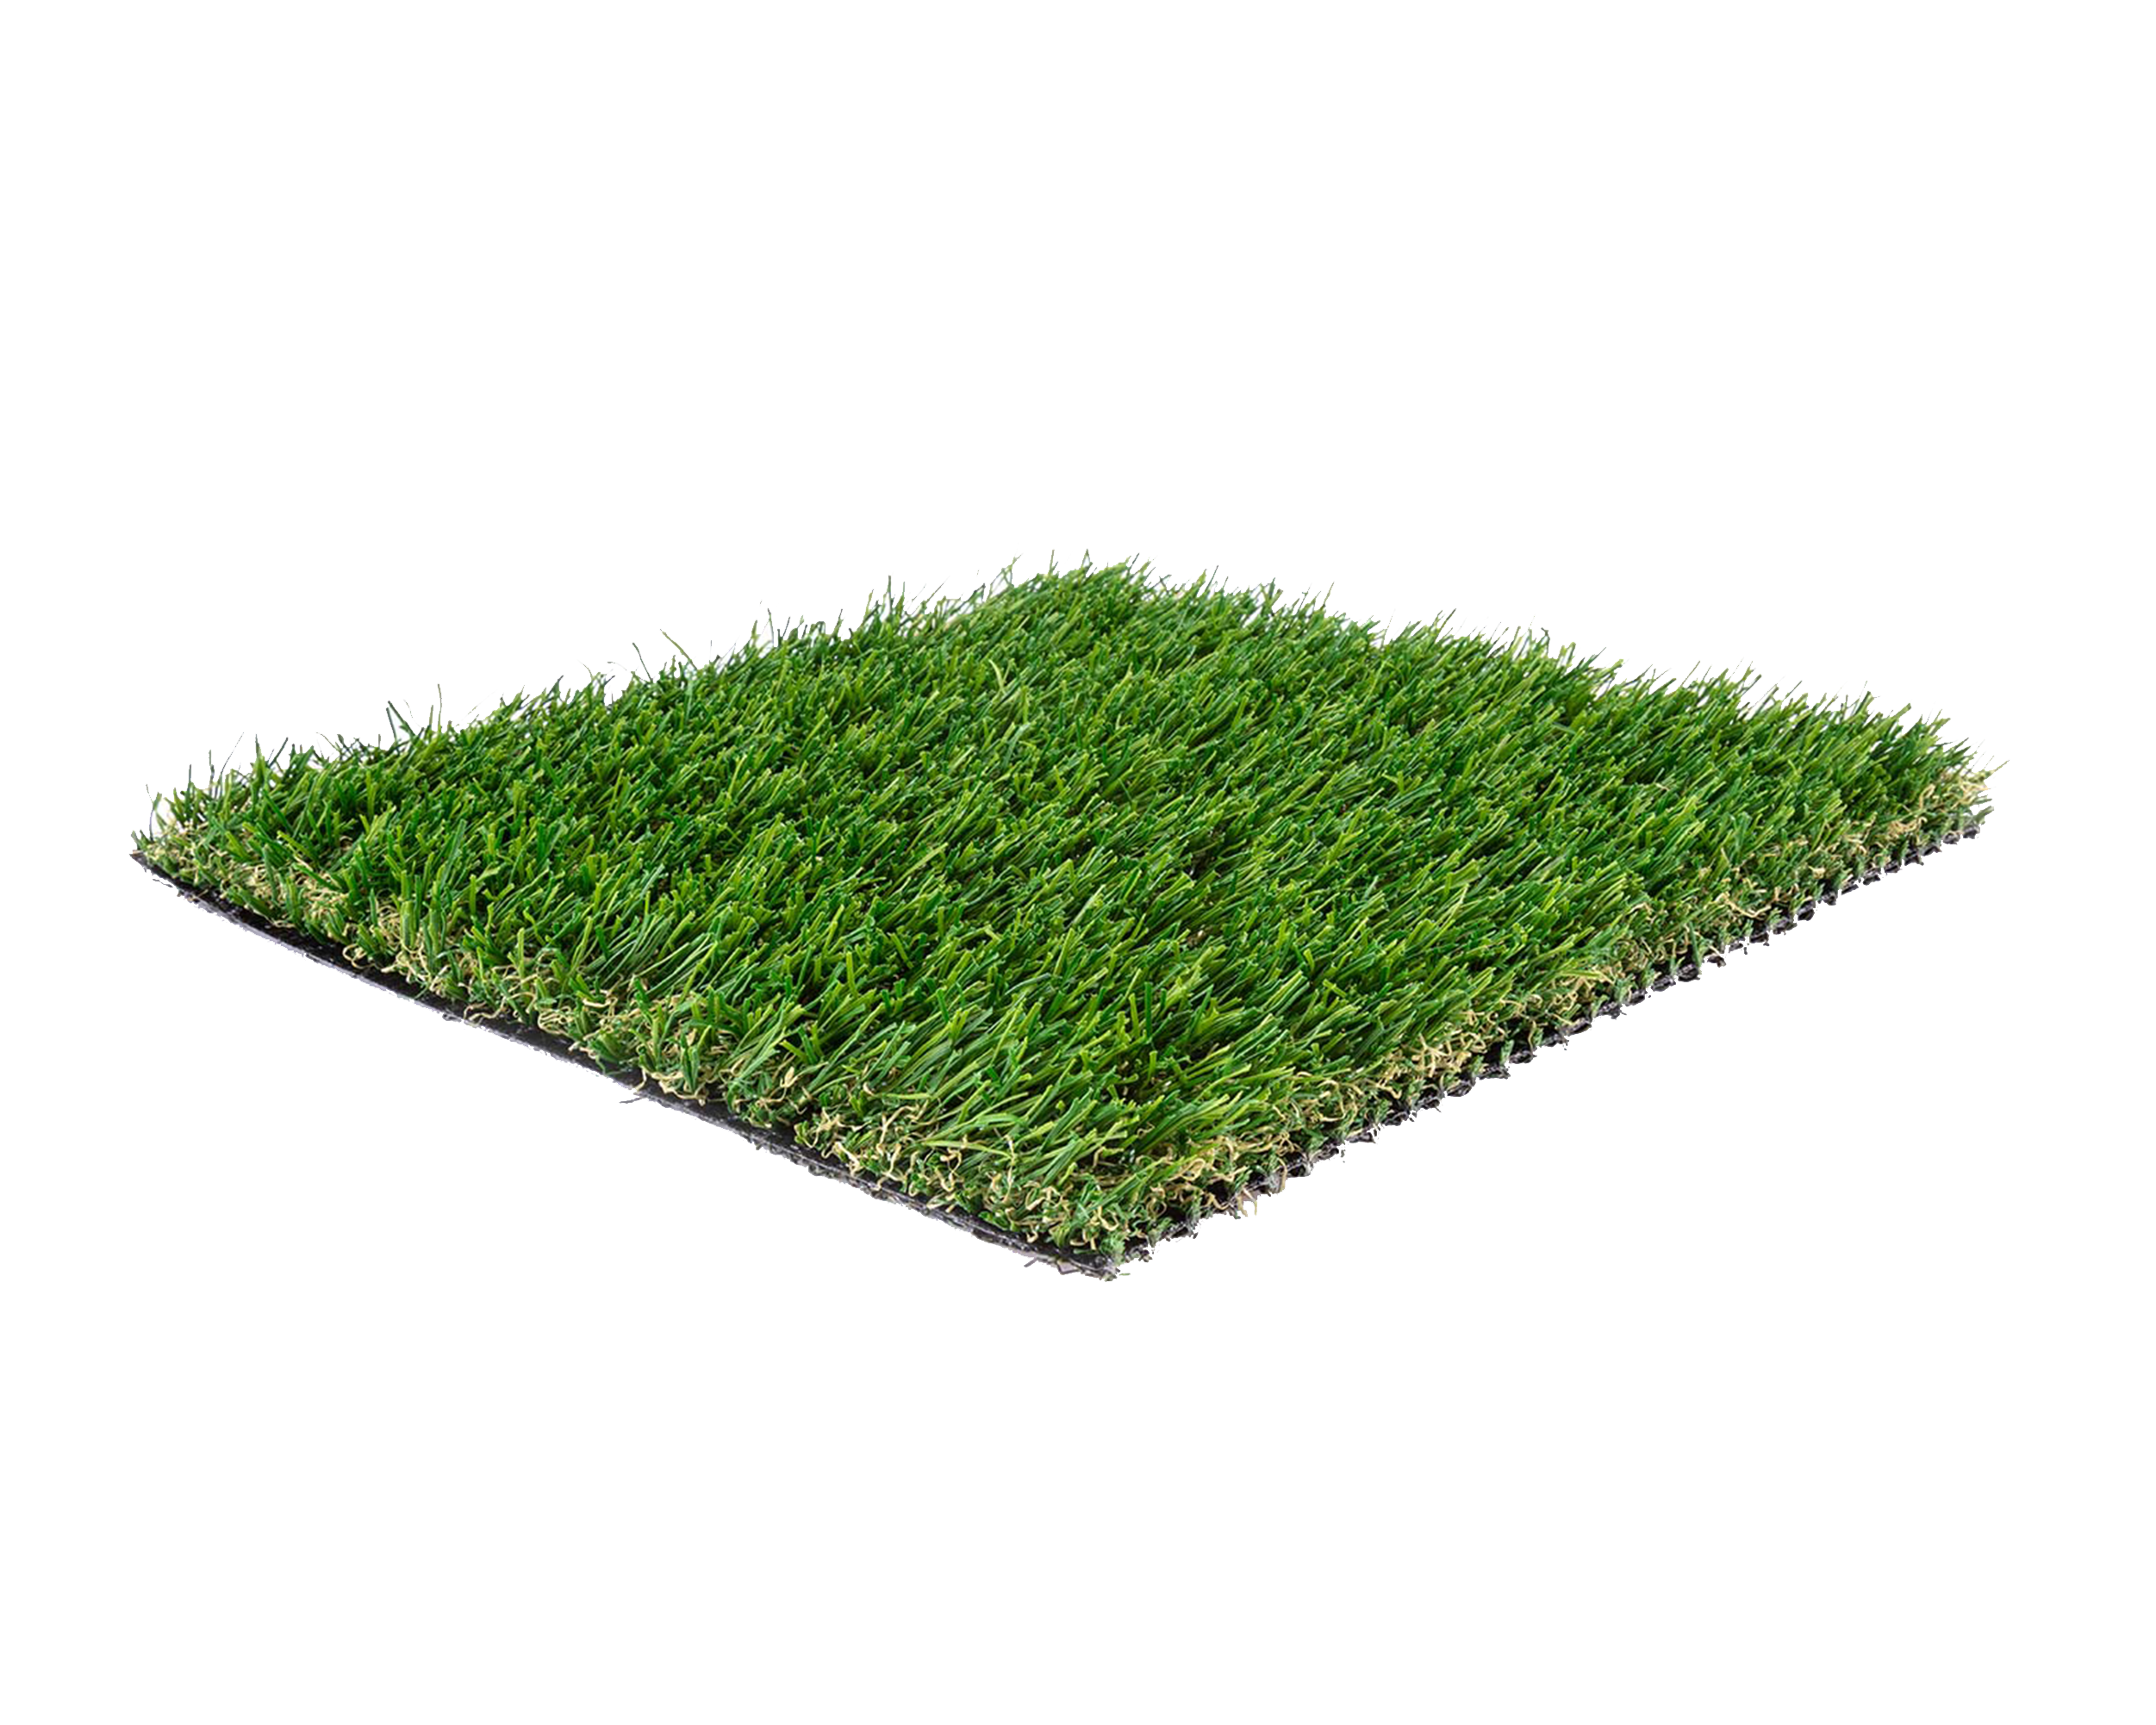 EcoShield's Basic Artificial Turf for multiple applications and Environments